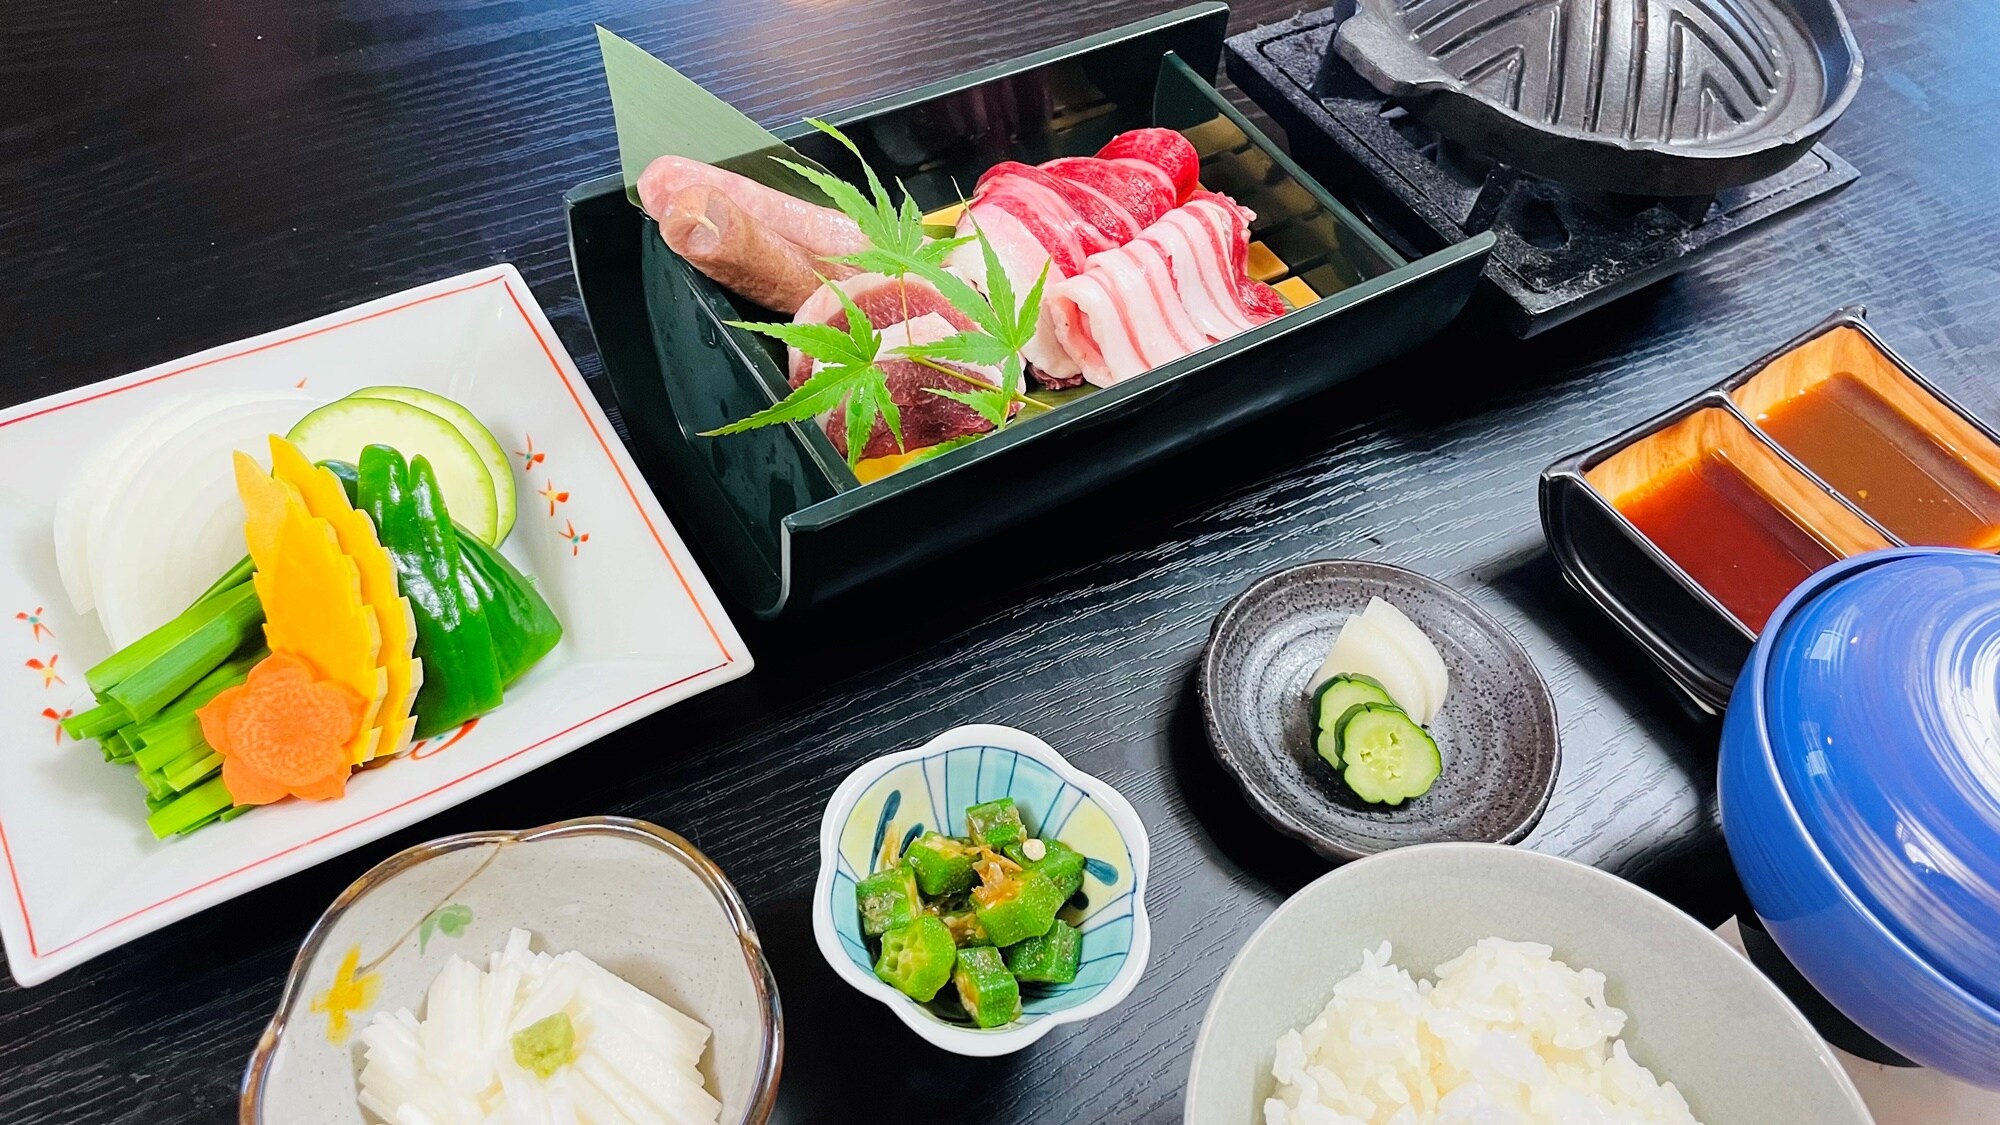 [Gibier Yakiniku Gozen] We serve natural wild boar meat in an iron pot for one person.